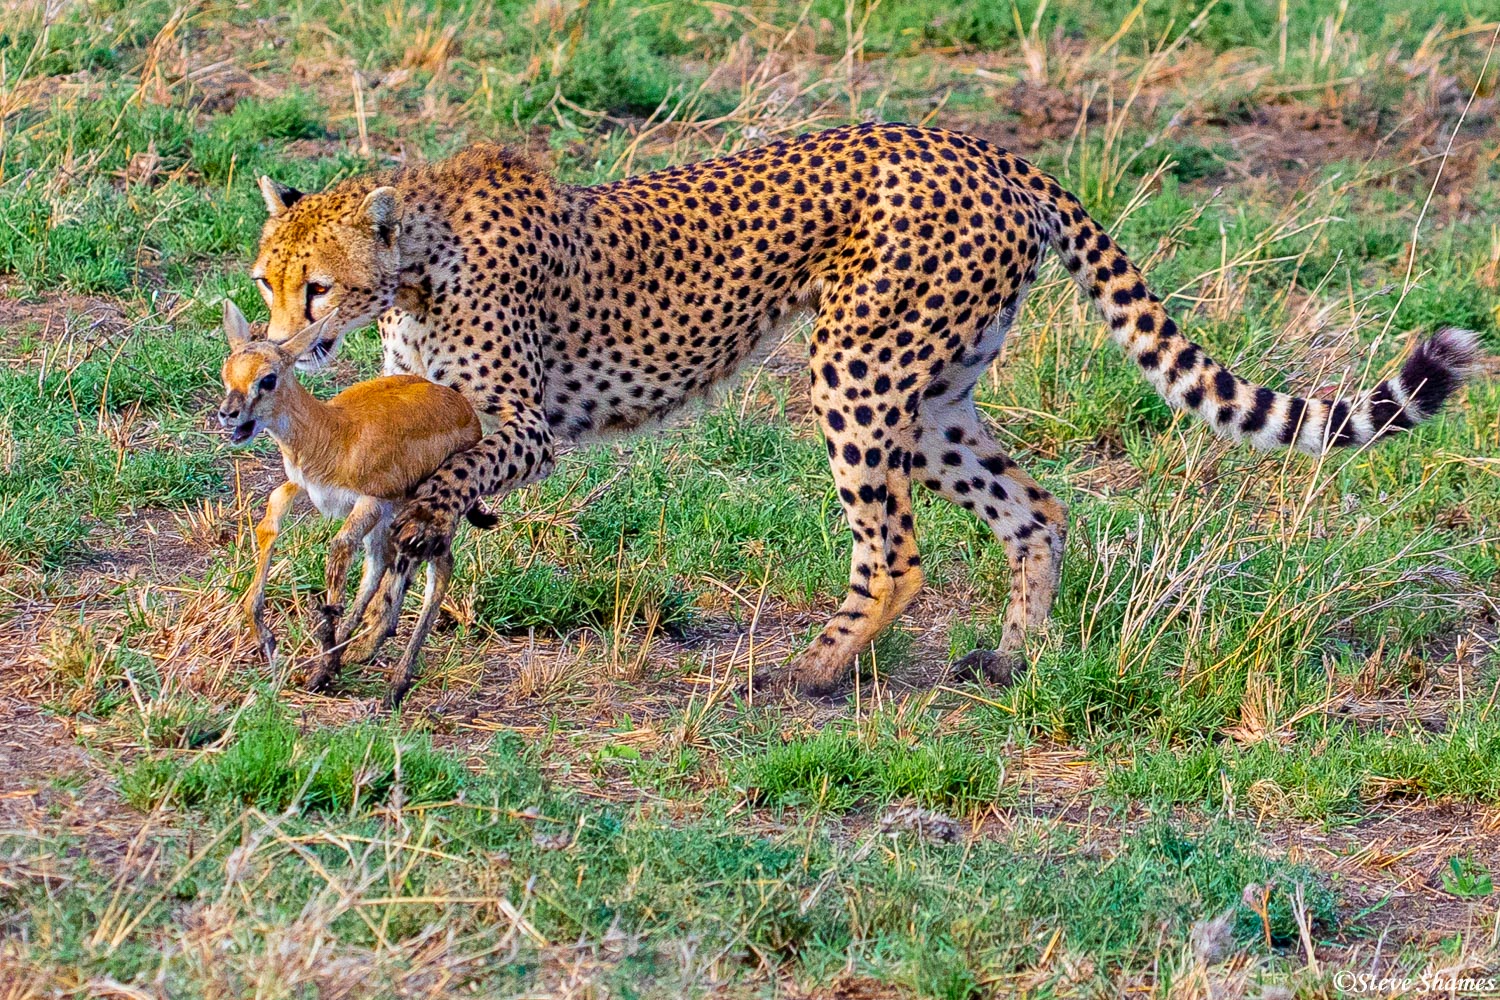 Here's an unusual scene -- a mother cheetah herding the Thomson's gazelle to present to her cub for hunting practice.